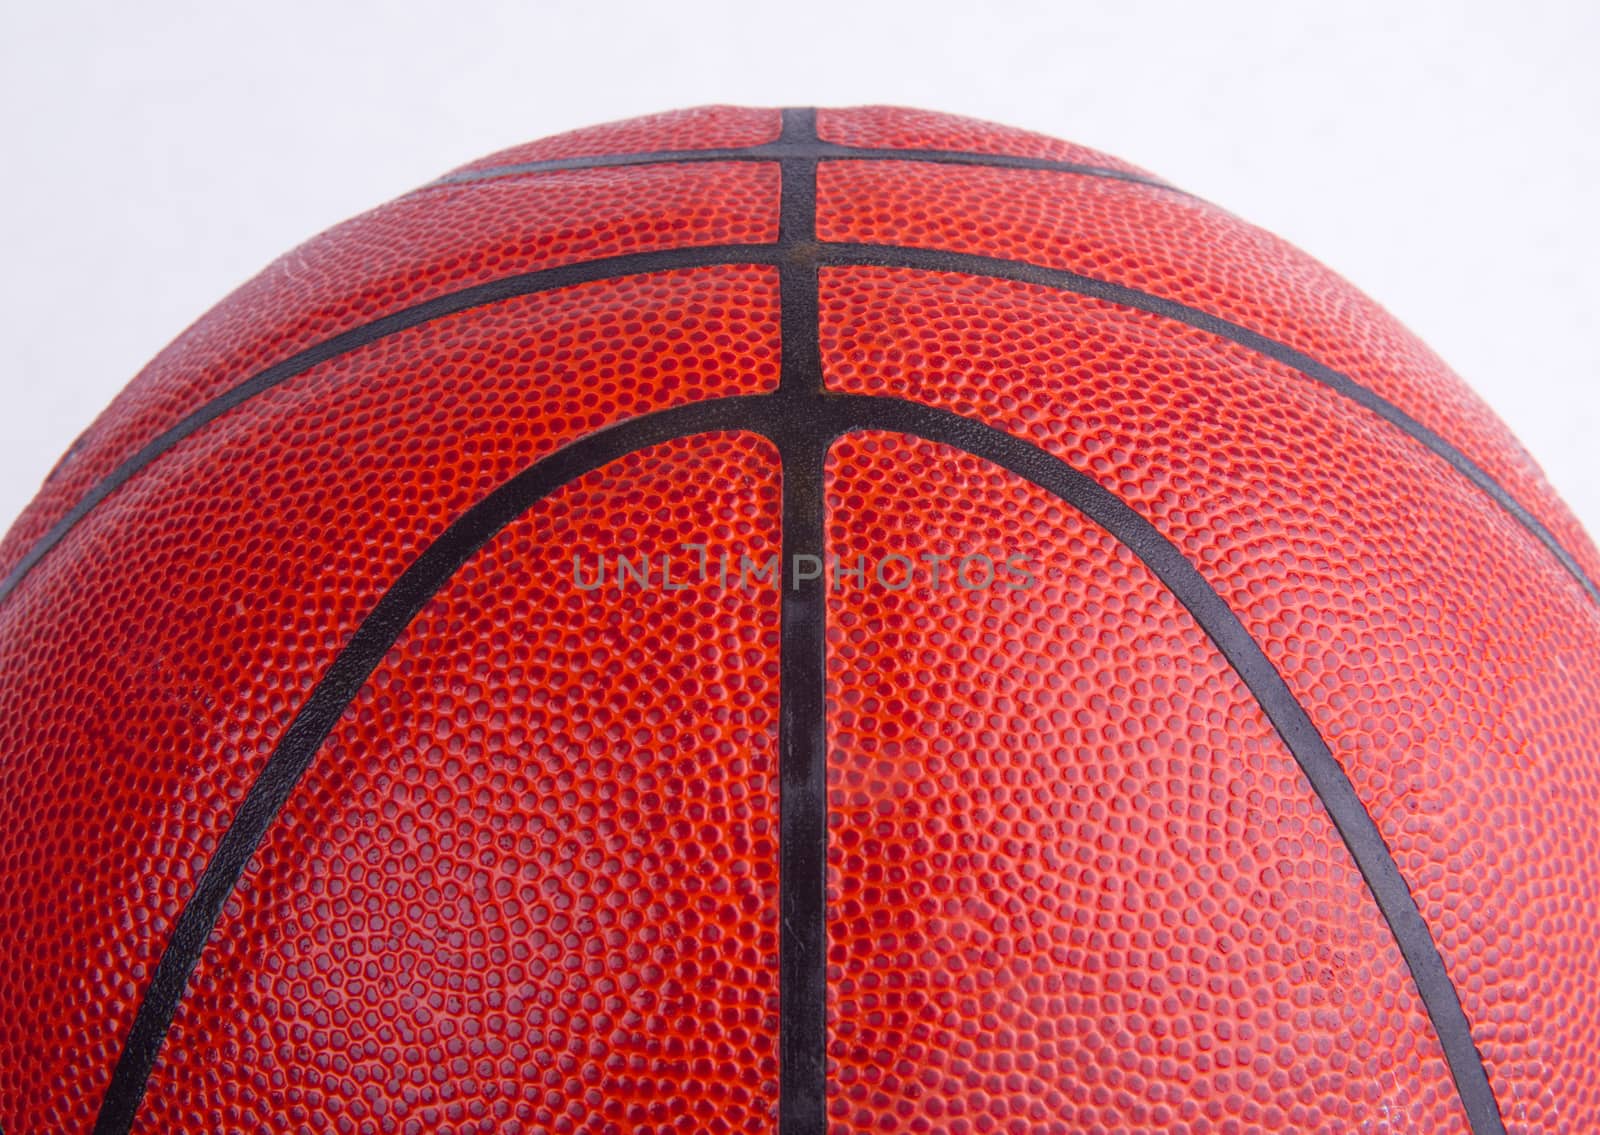 Basketball Close up Partial View Isolated on White Pebbled Pattern by ChrisBoswell